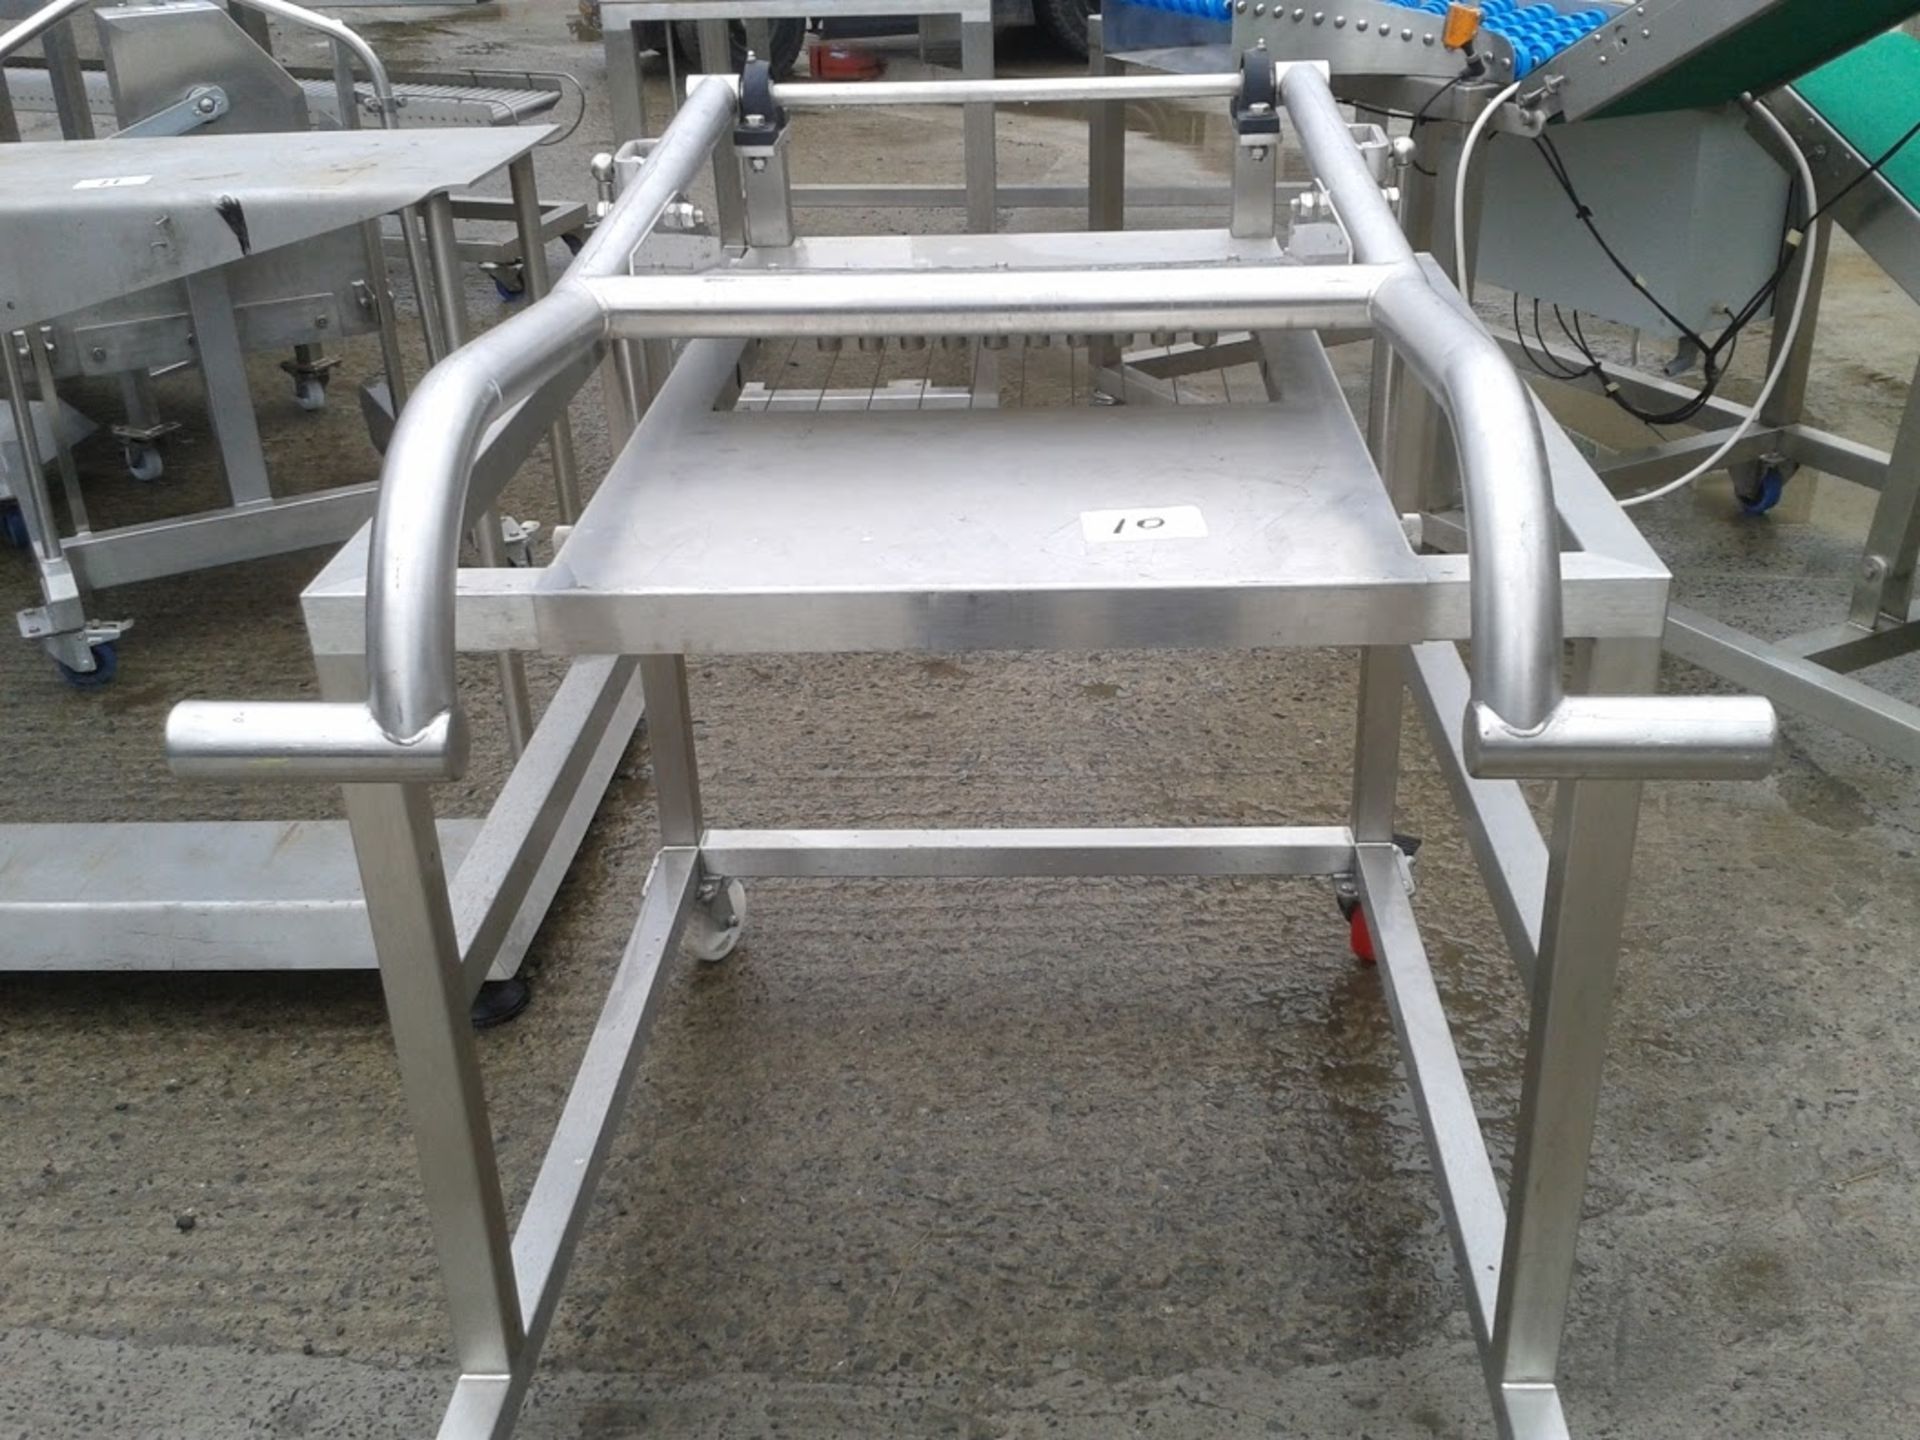 Stainless Steel Mobile Cheese Block Cutter, 500mm x 900mm - Image 2 of 2